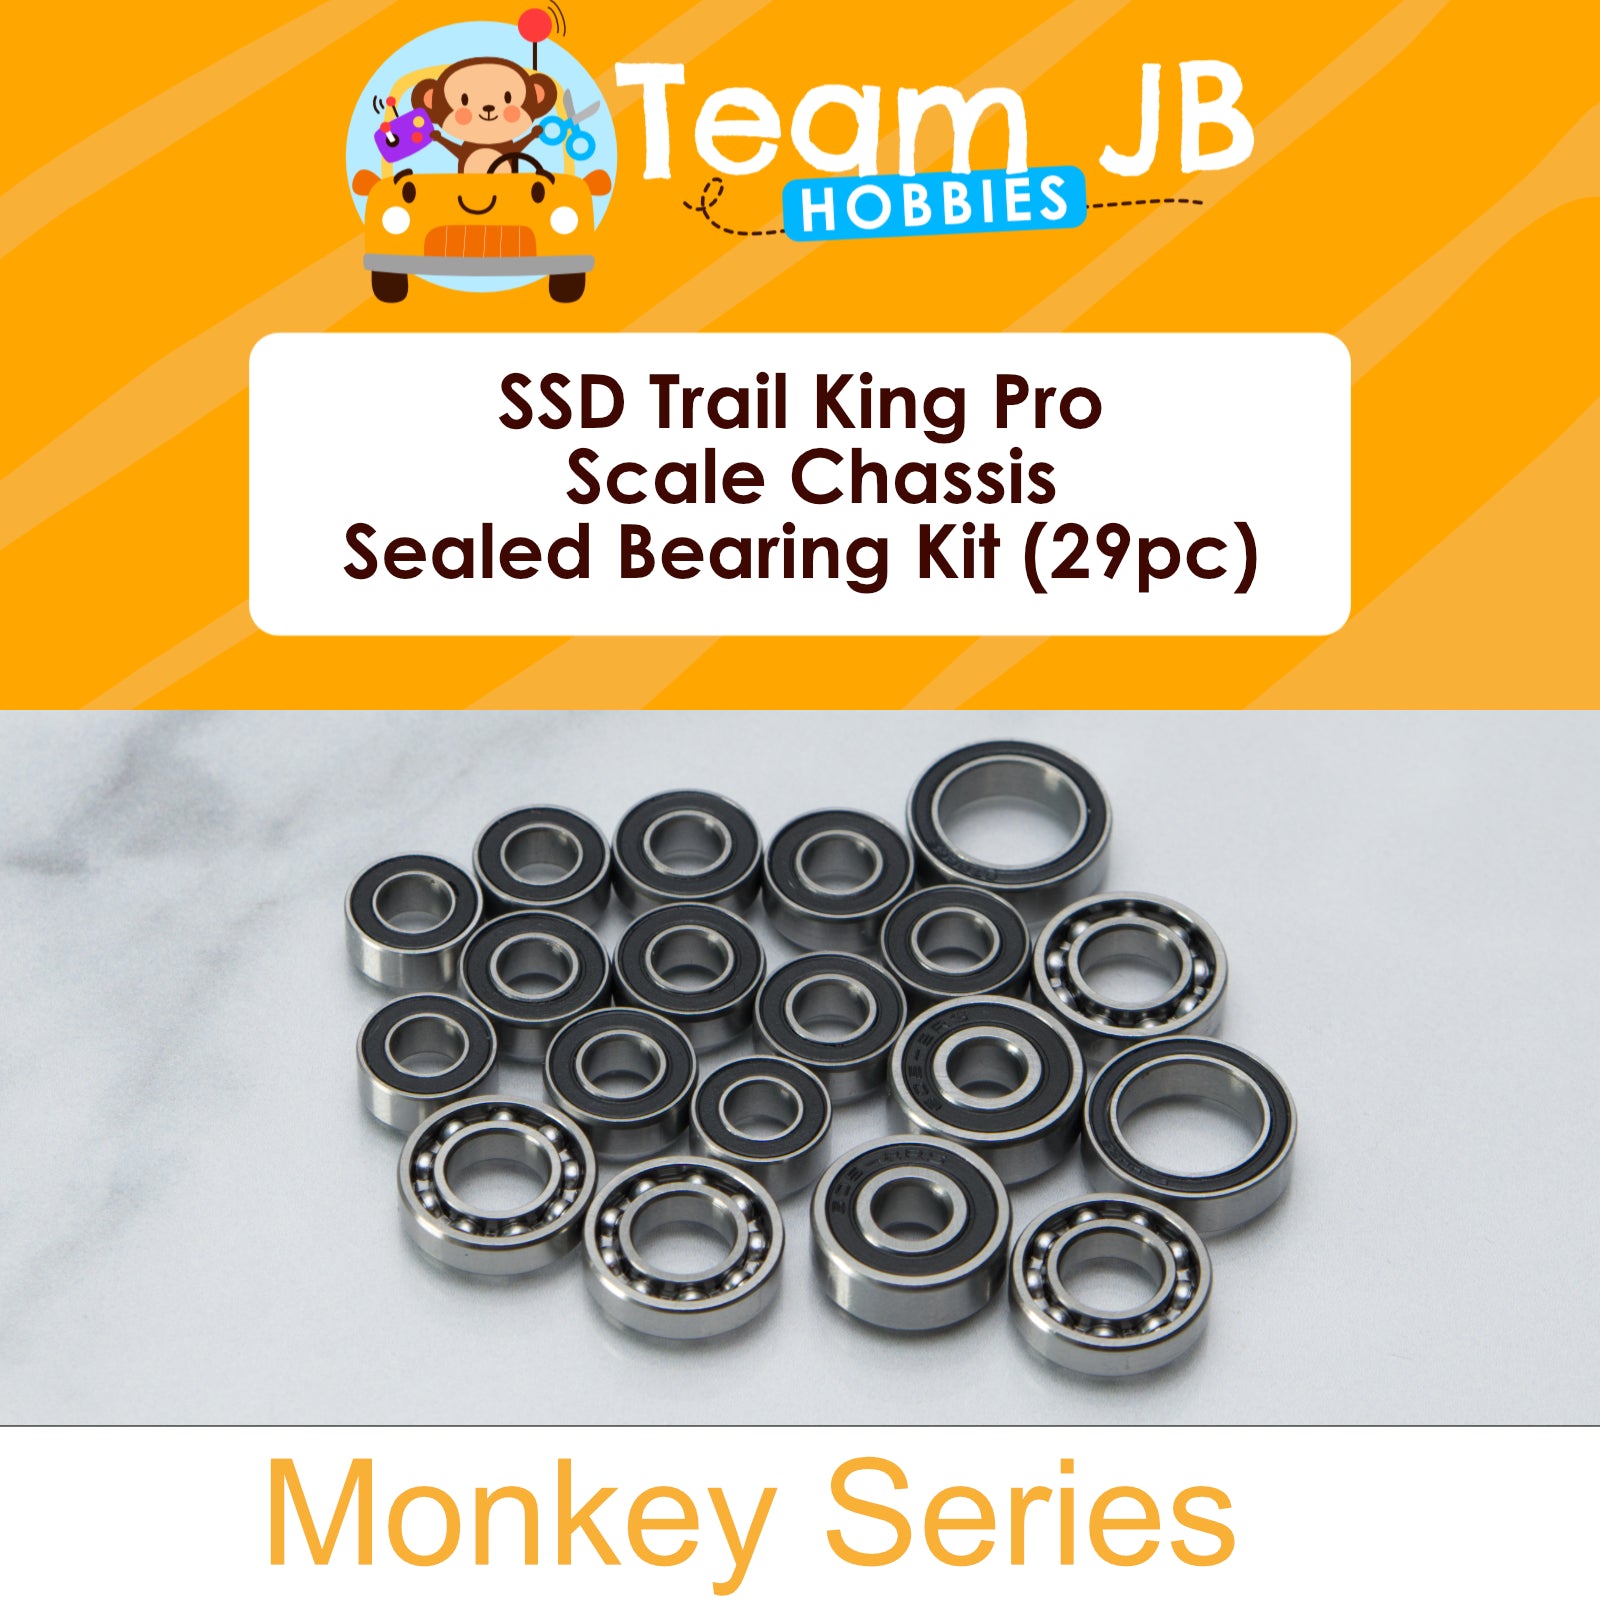 SSD Trail King Pro Scale Chassis - Sealed Bearing Kit